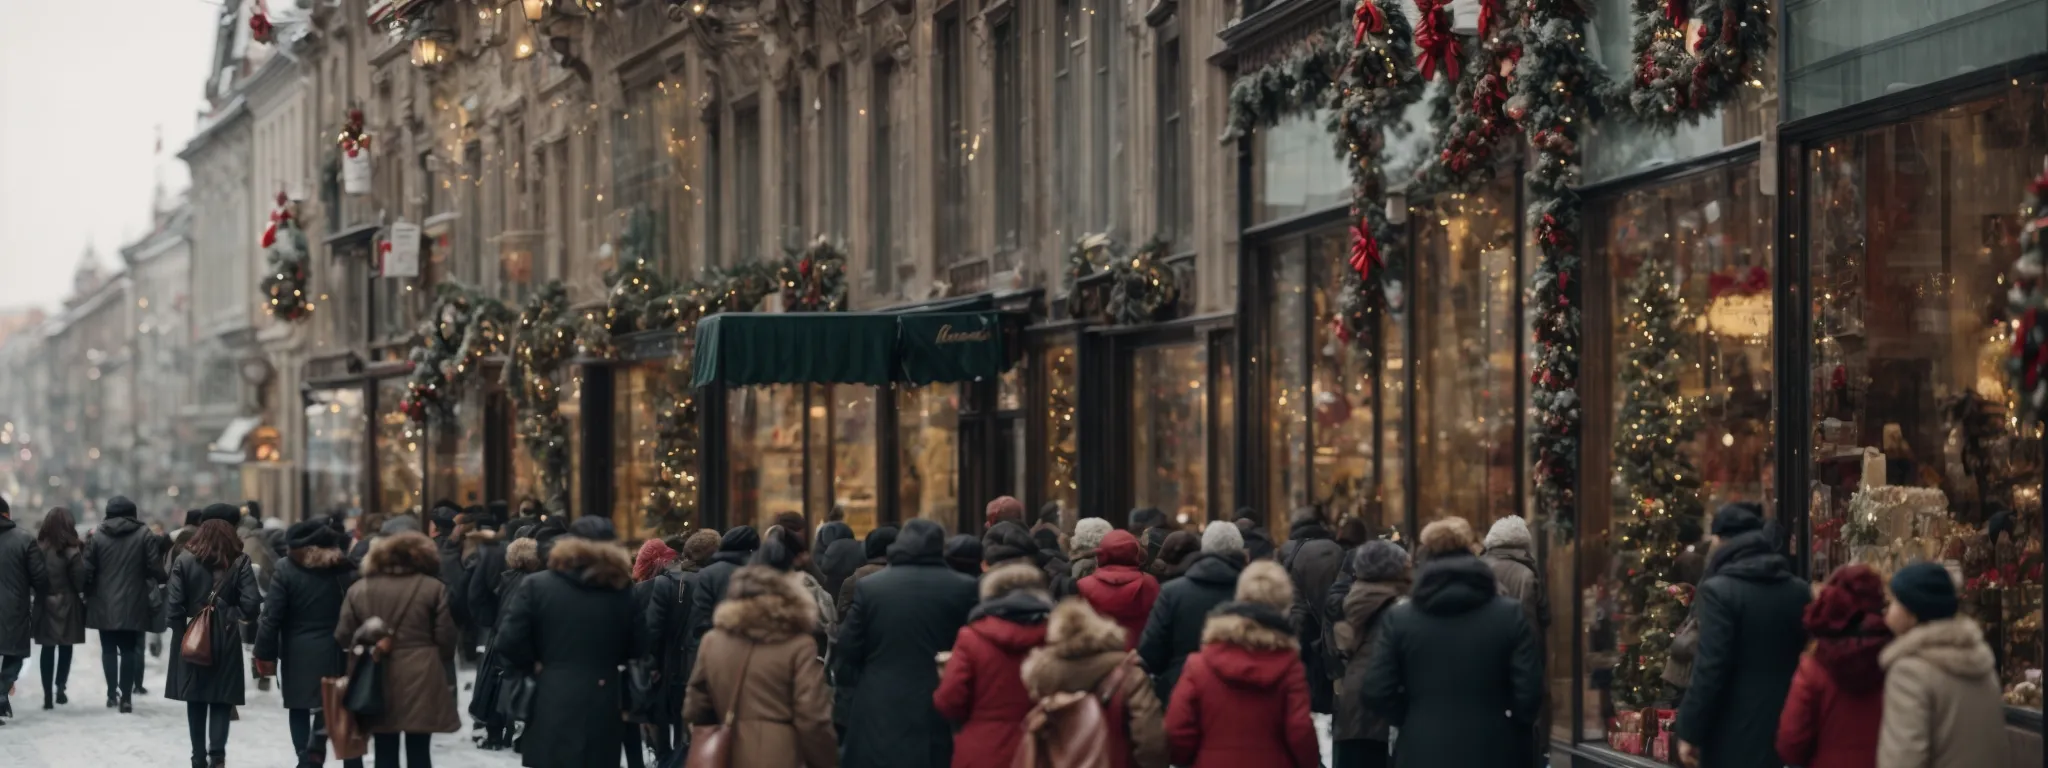 a bustling shopping street adorned with festive decorations as shoppers pass by seasonal window displays.